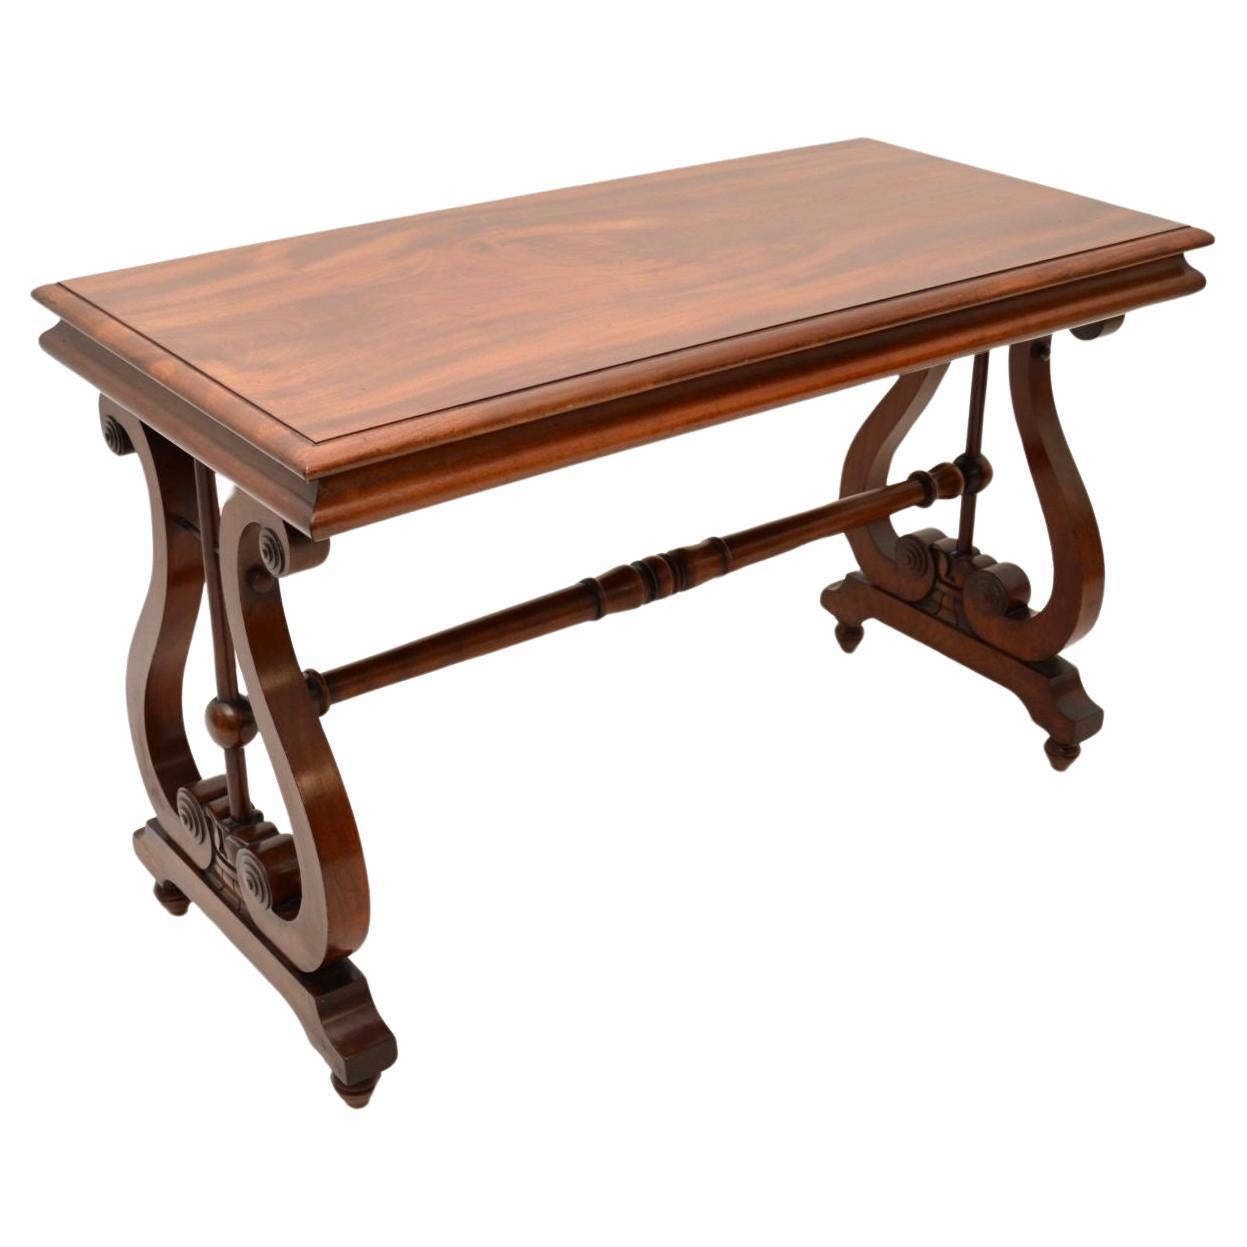 Antique Regency Period Library Table / Desk For Sale